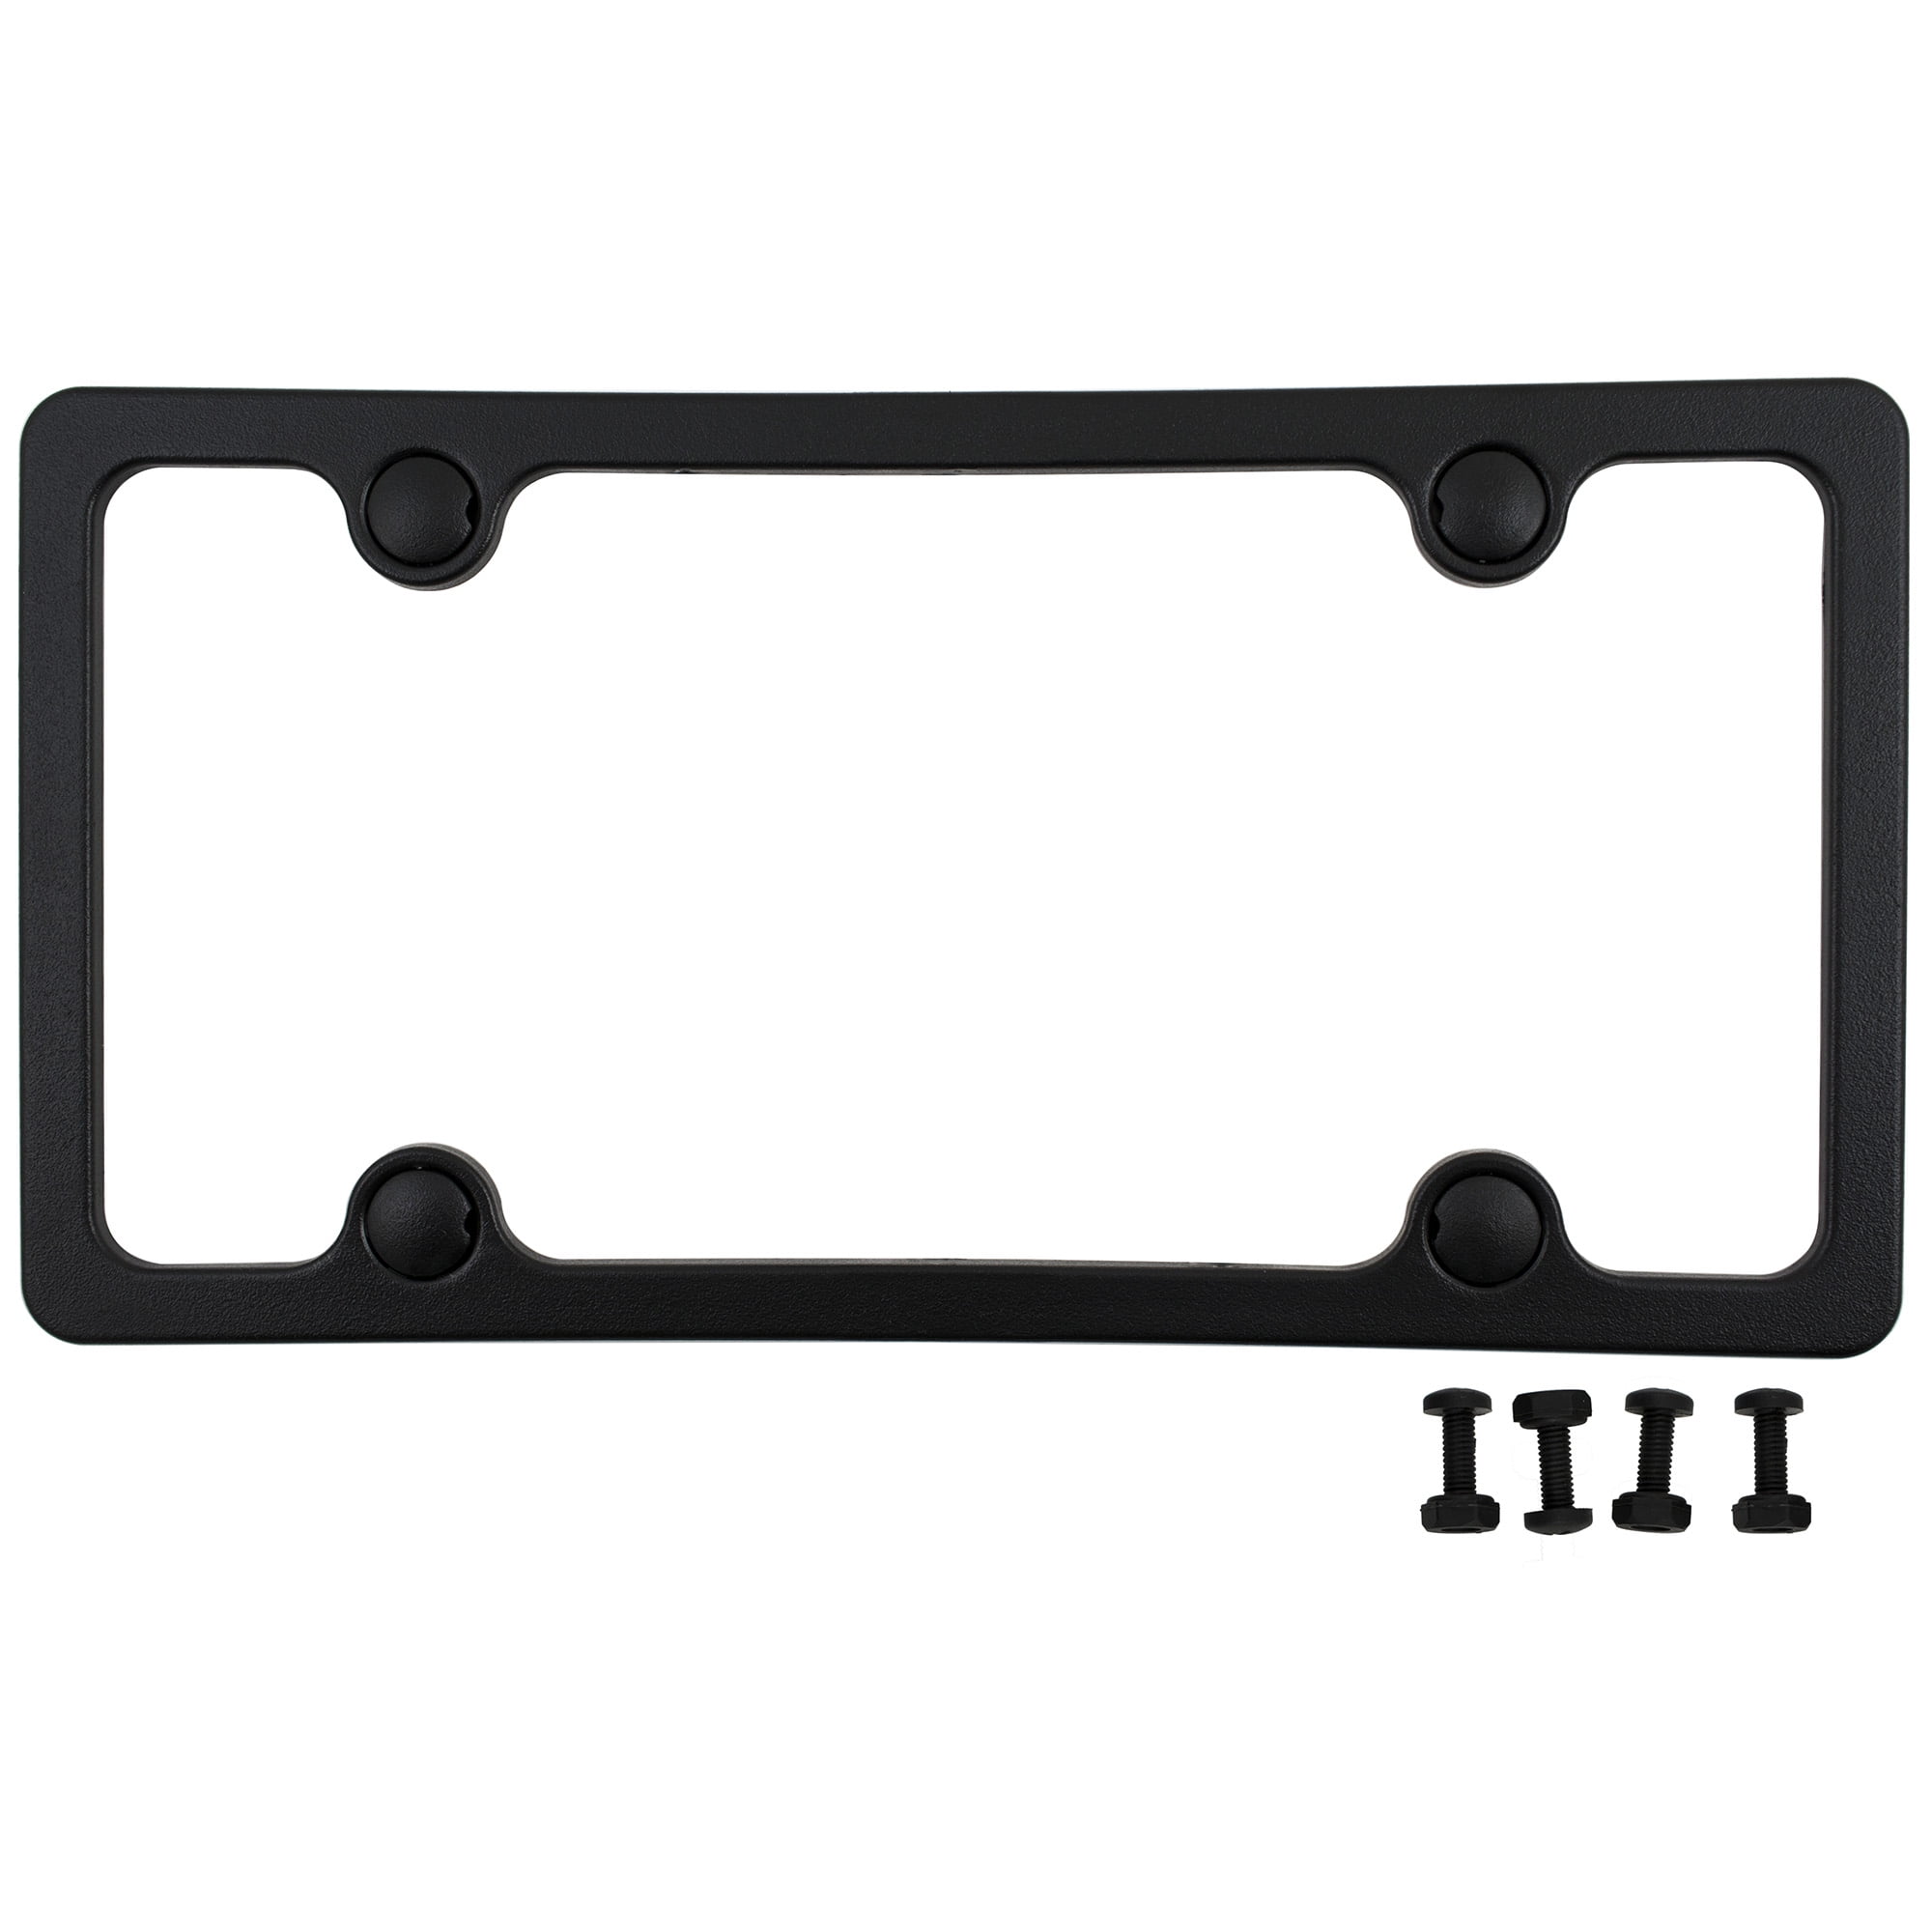 Auto Drive Stainless Steel Anti-Theft License Plate Frame Mounting Kit,  93390W 